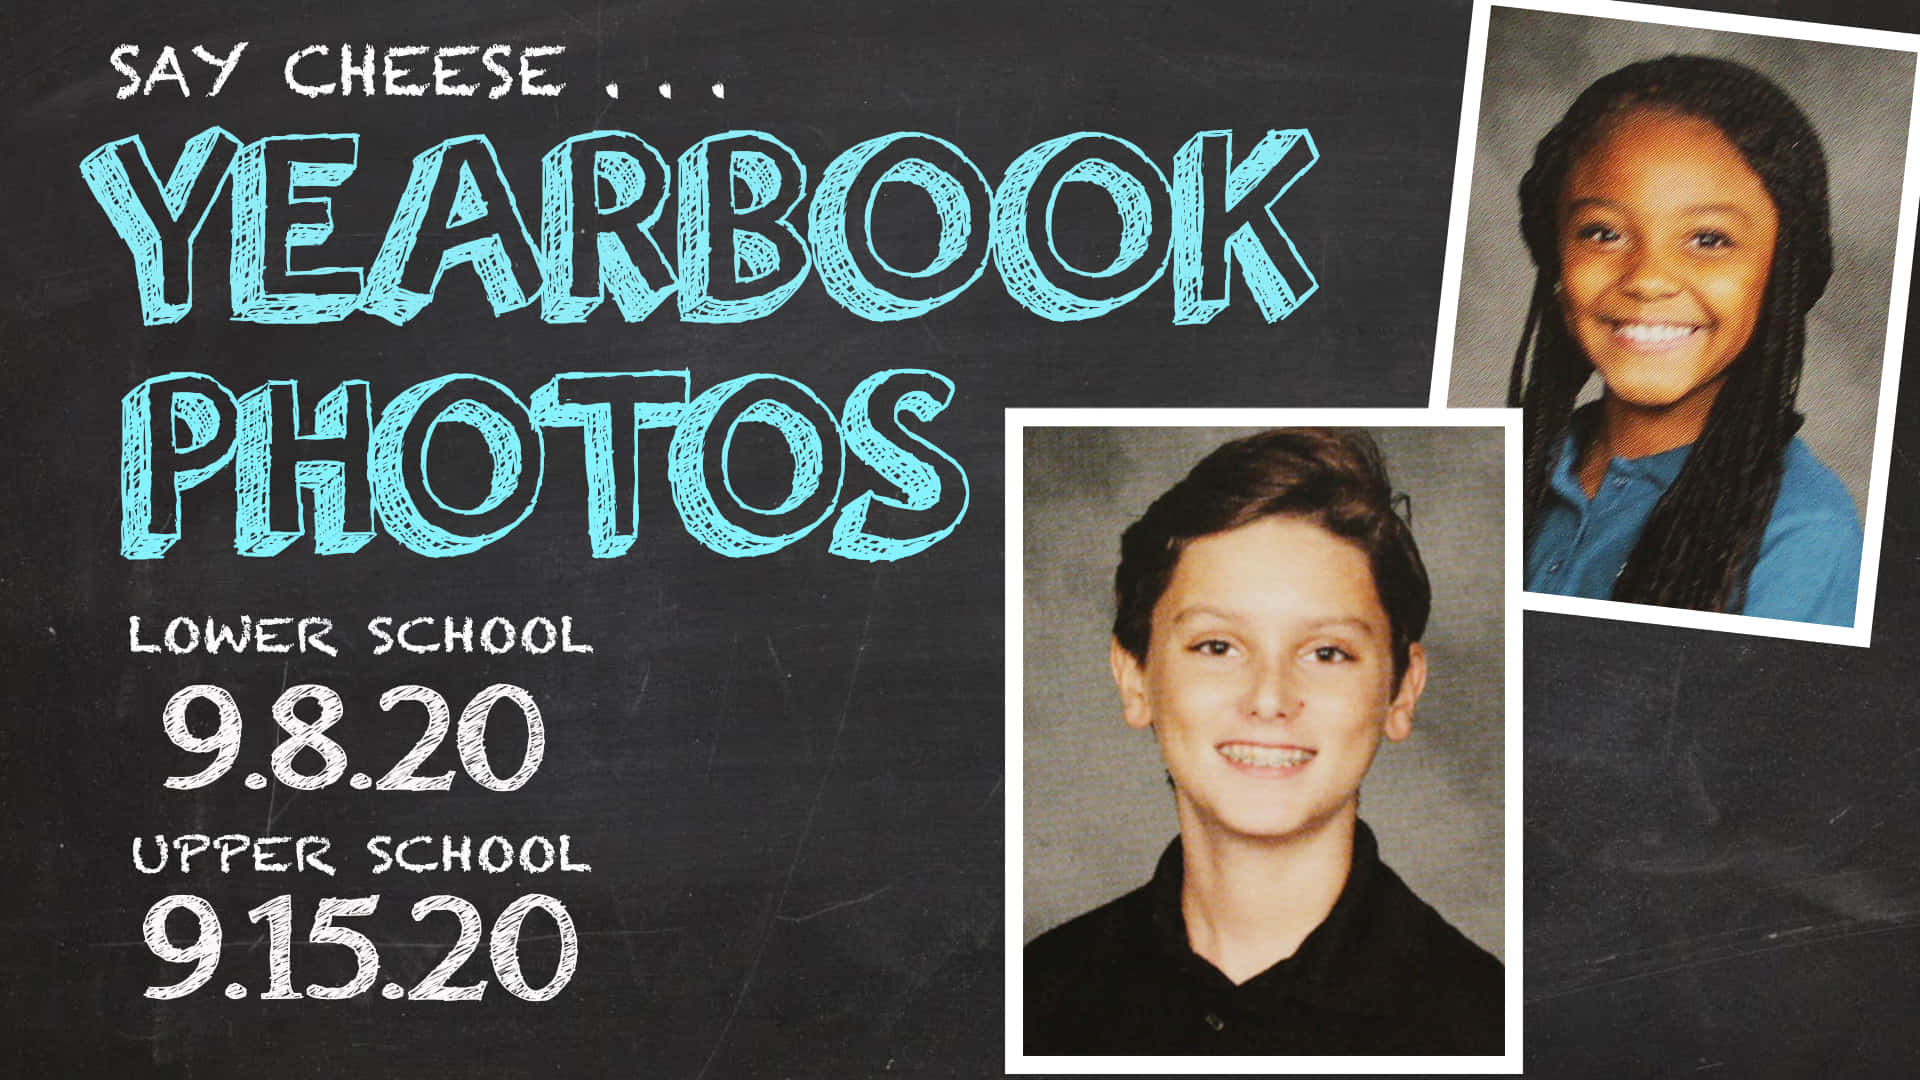 A Poster With Two Children And A Yearbook Photo